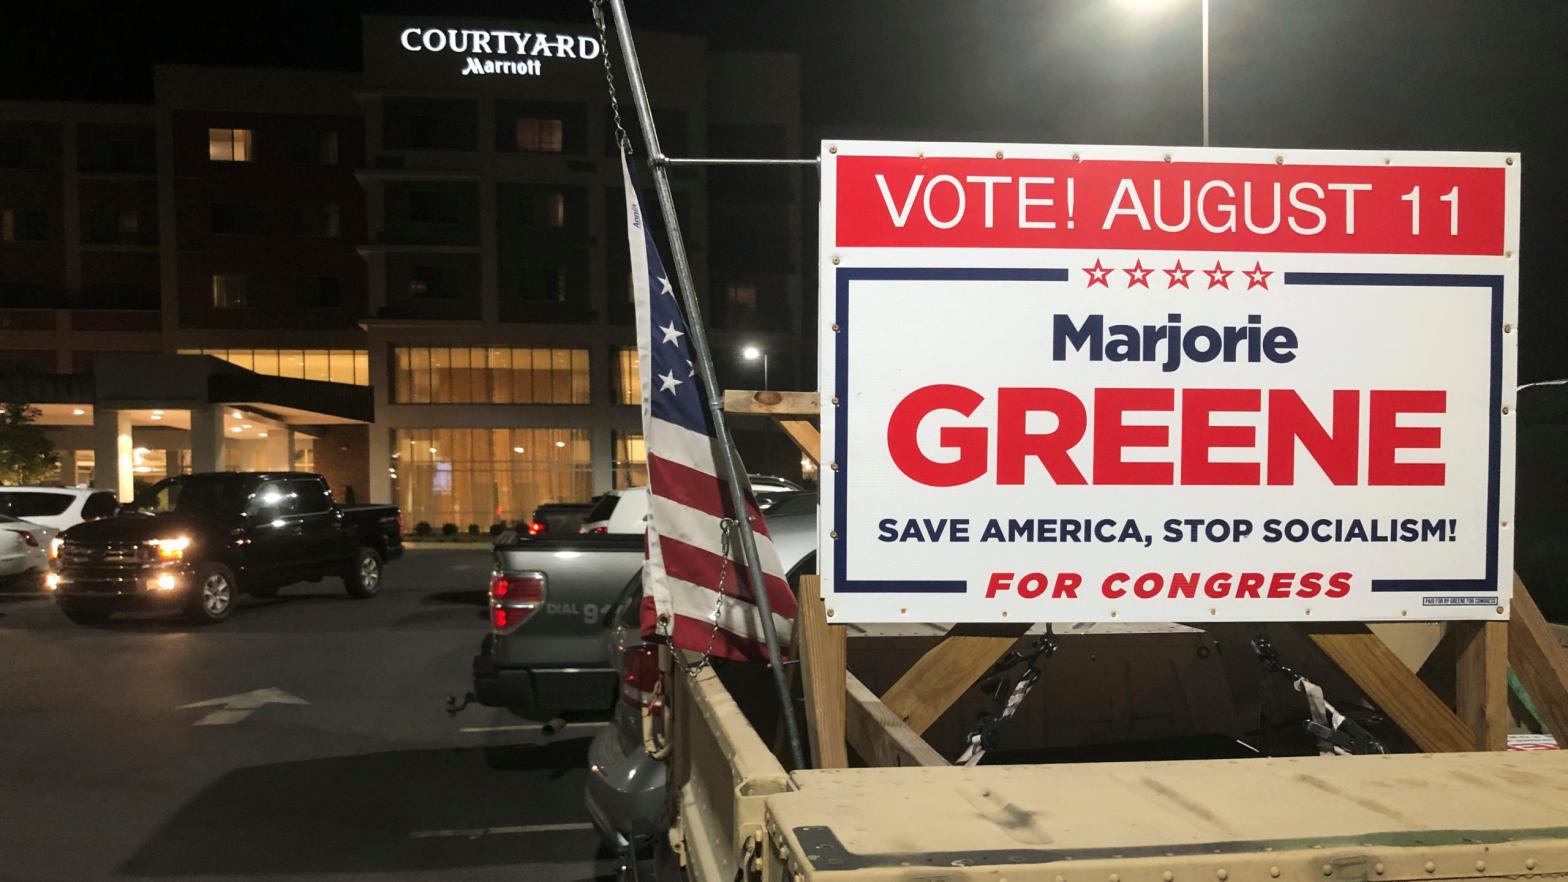 Marjorie Greene campaign signs in Rome, Georgia on Aug. 11, 2020. (Photo: Mike Stewart, AP)